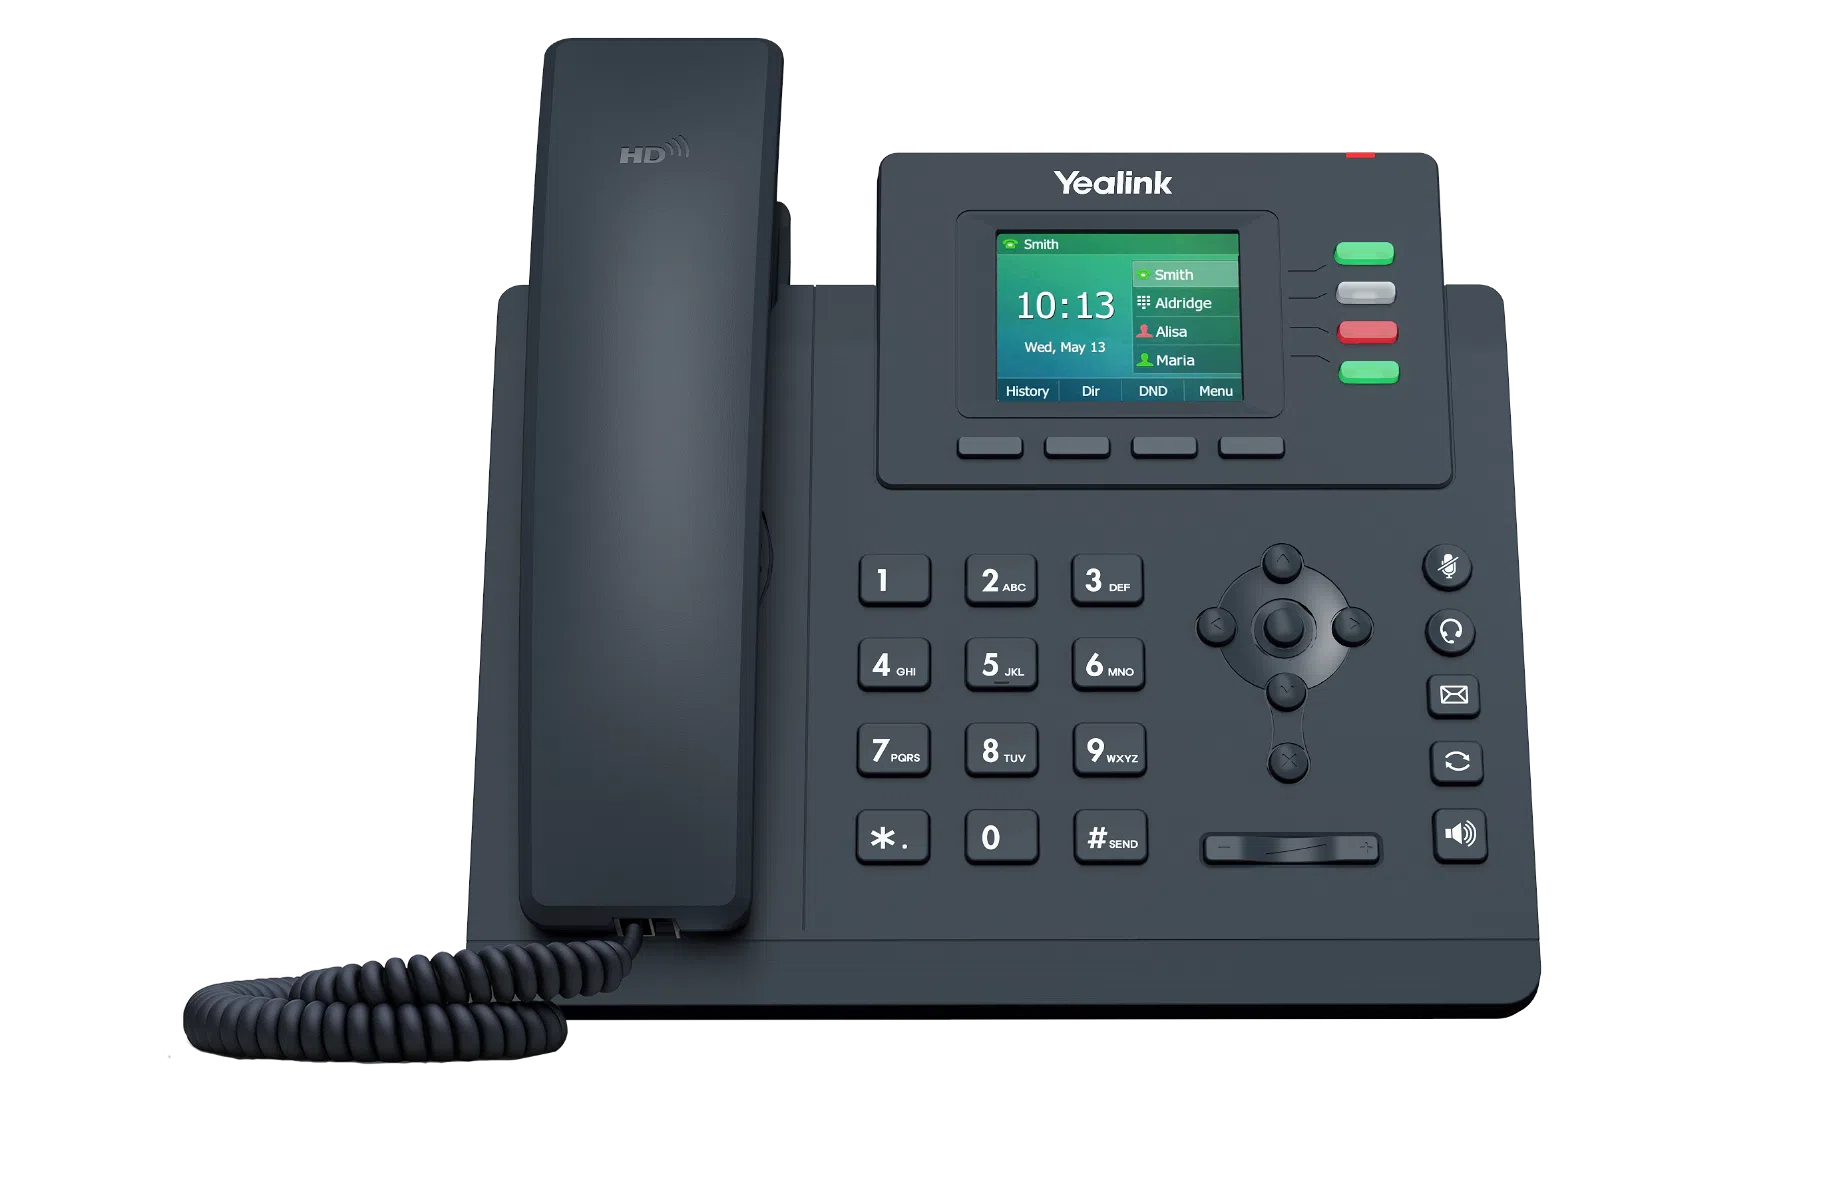 Can you provide the model number for the Yealink T33G Entry Level Gigabit PoE Color IP Phone?